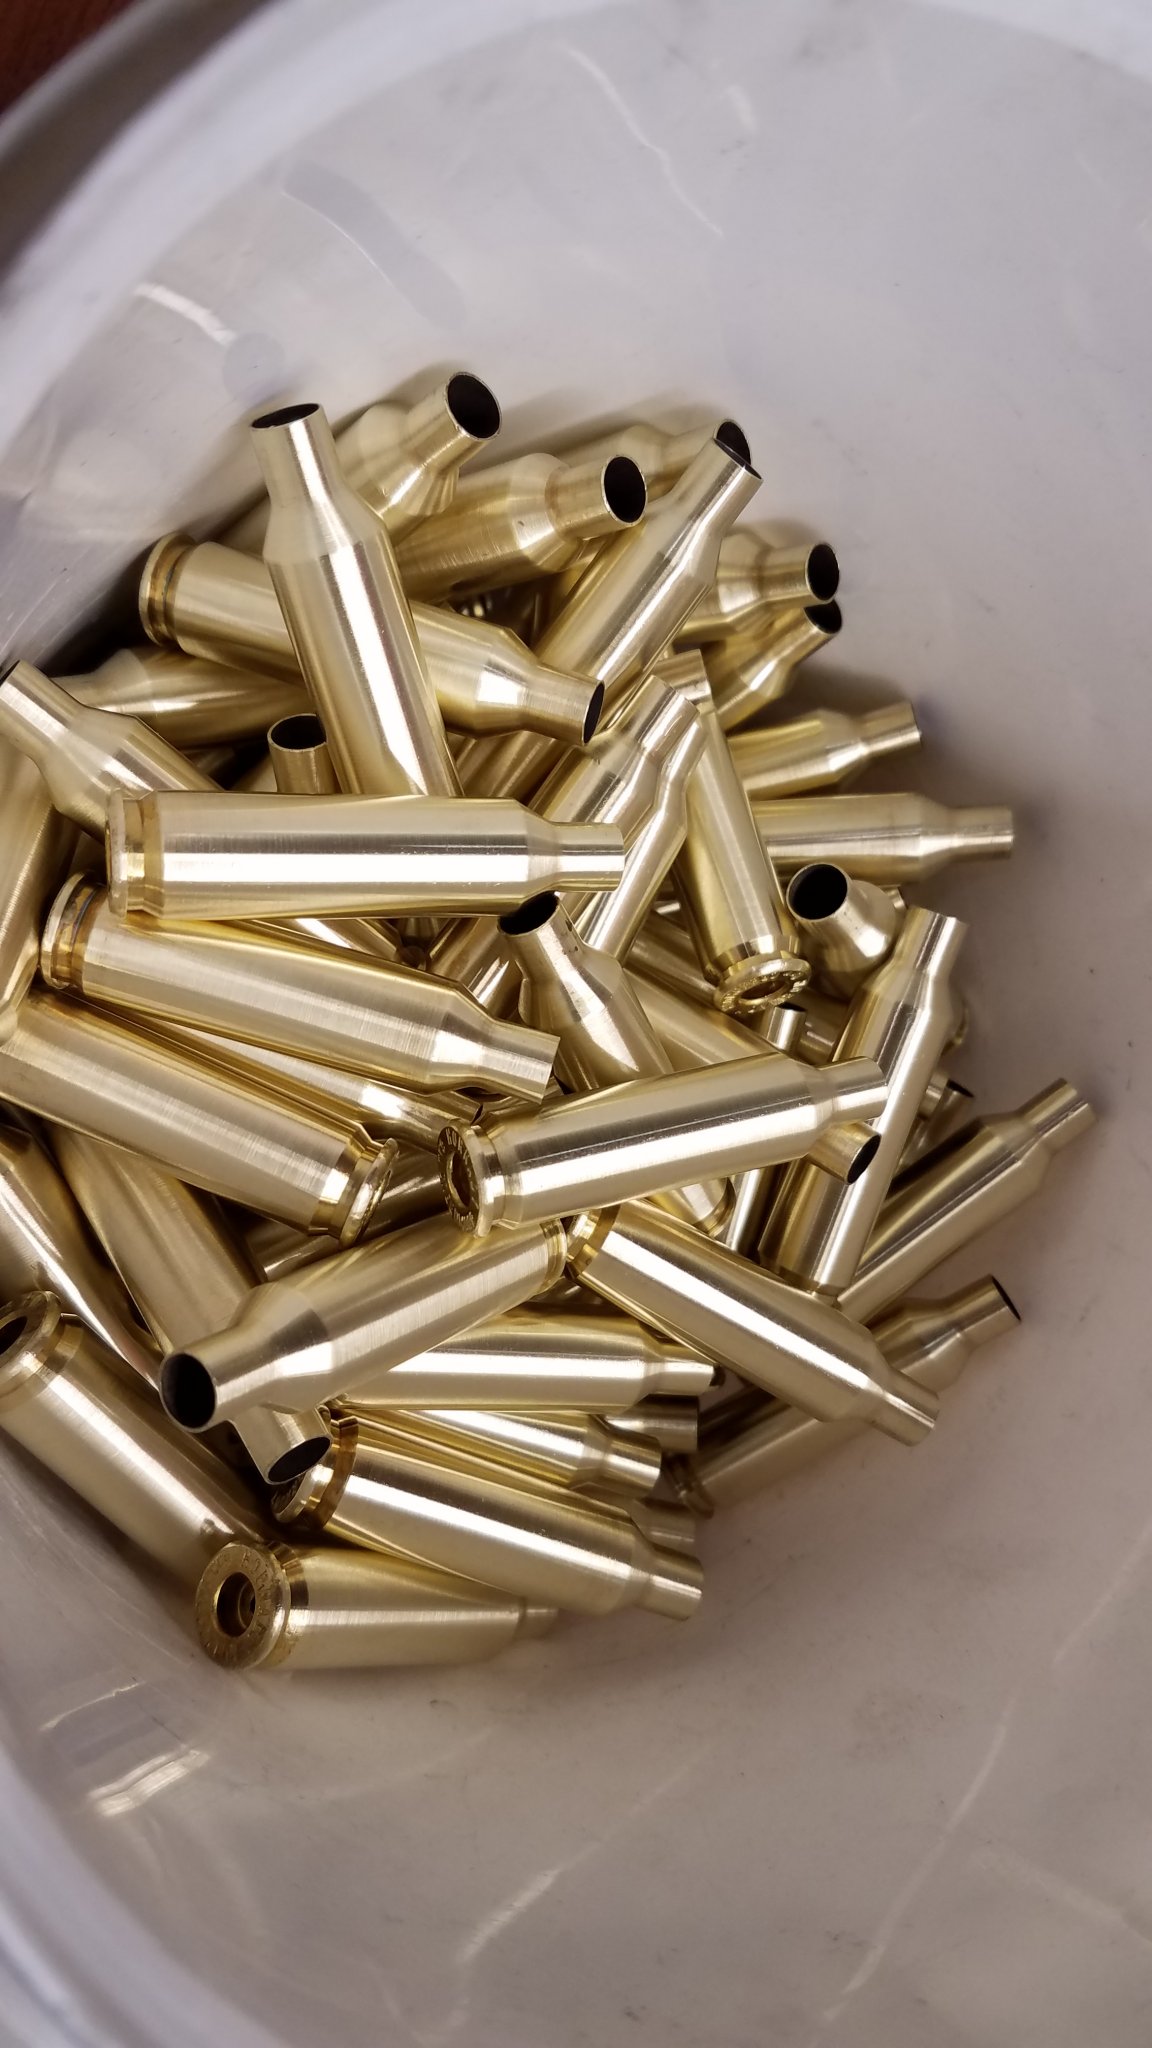 Whats the best tumbler for cleaning brass